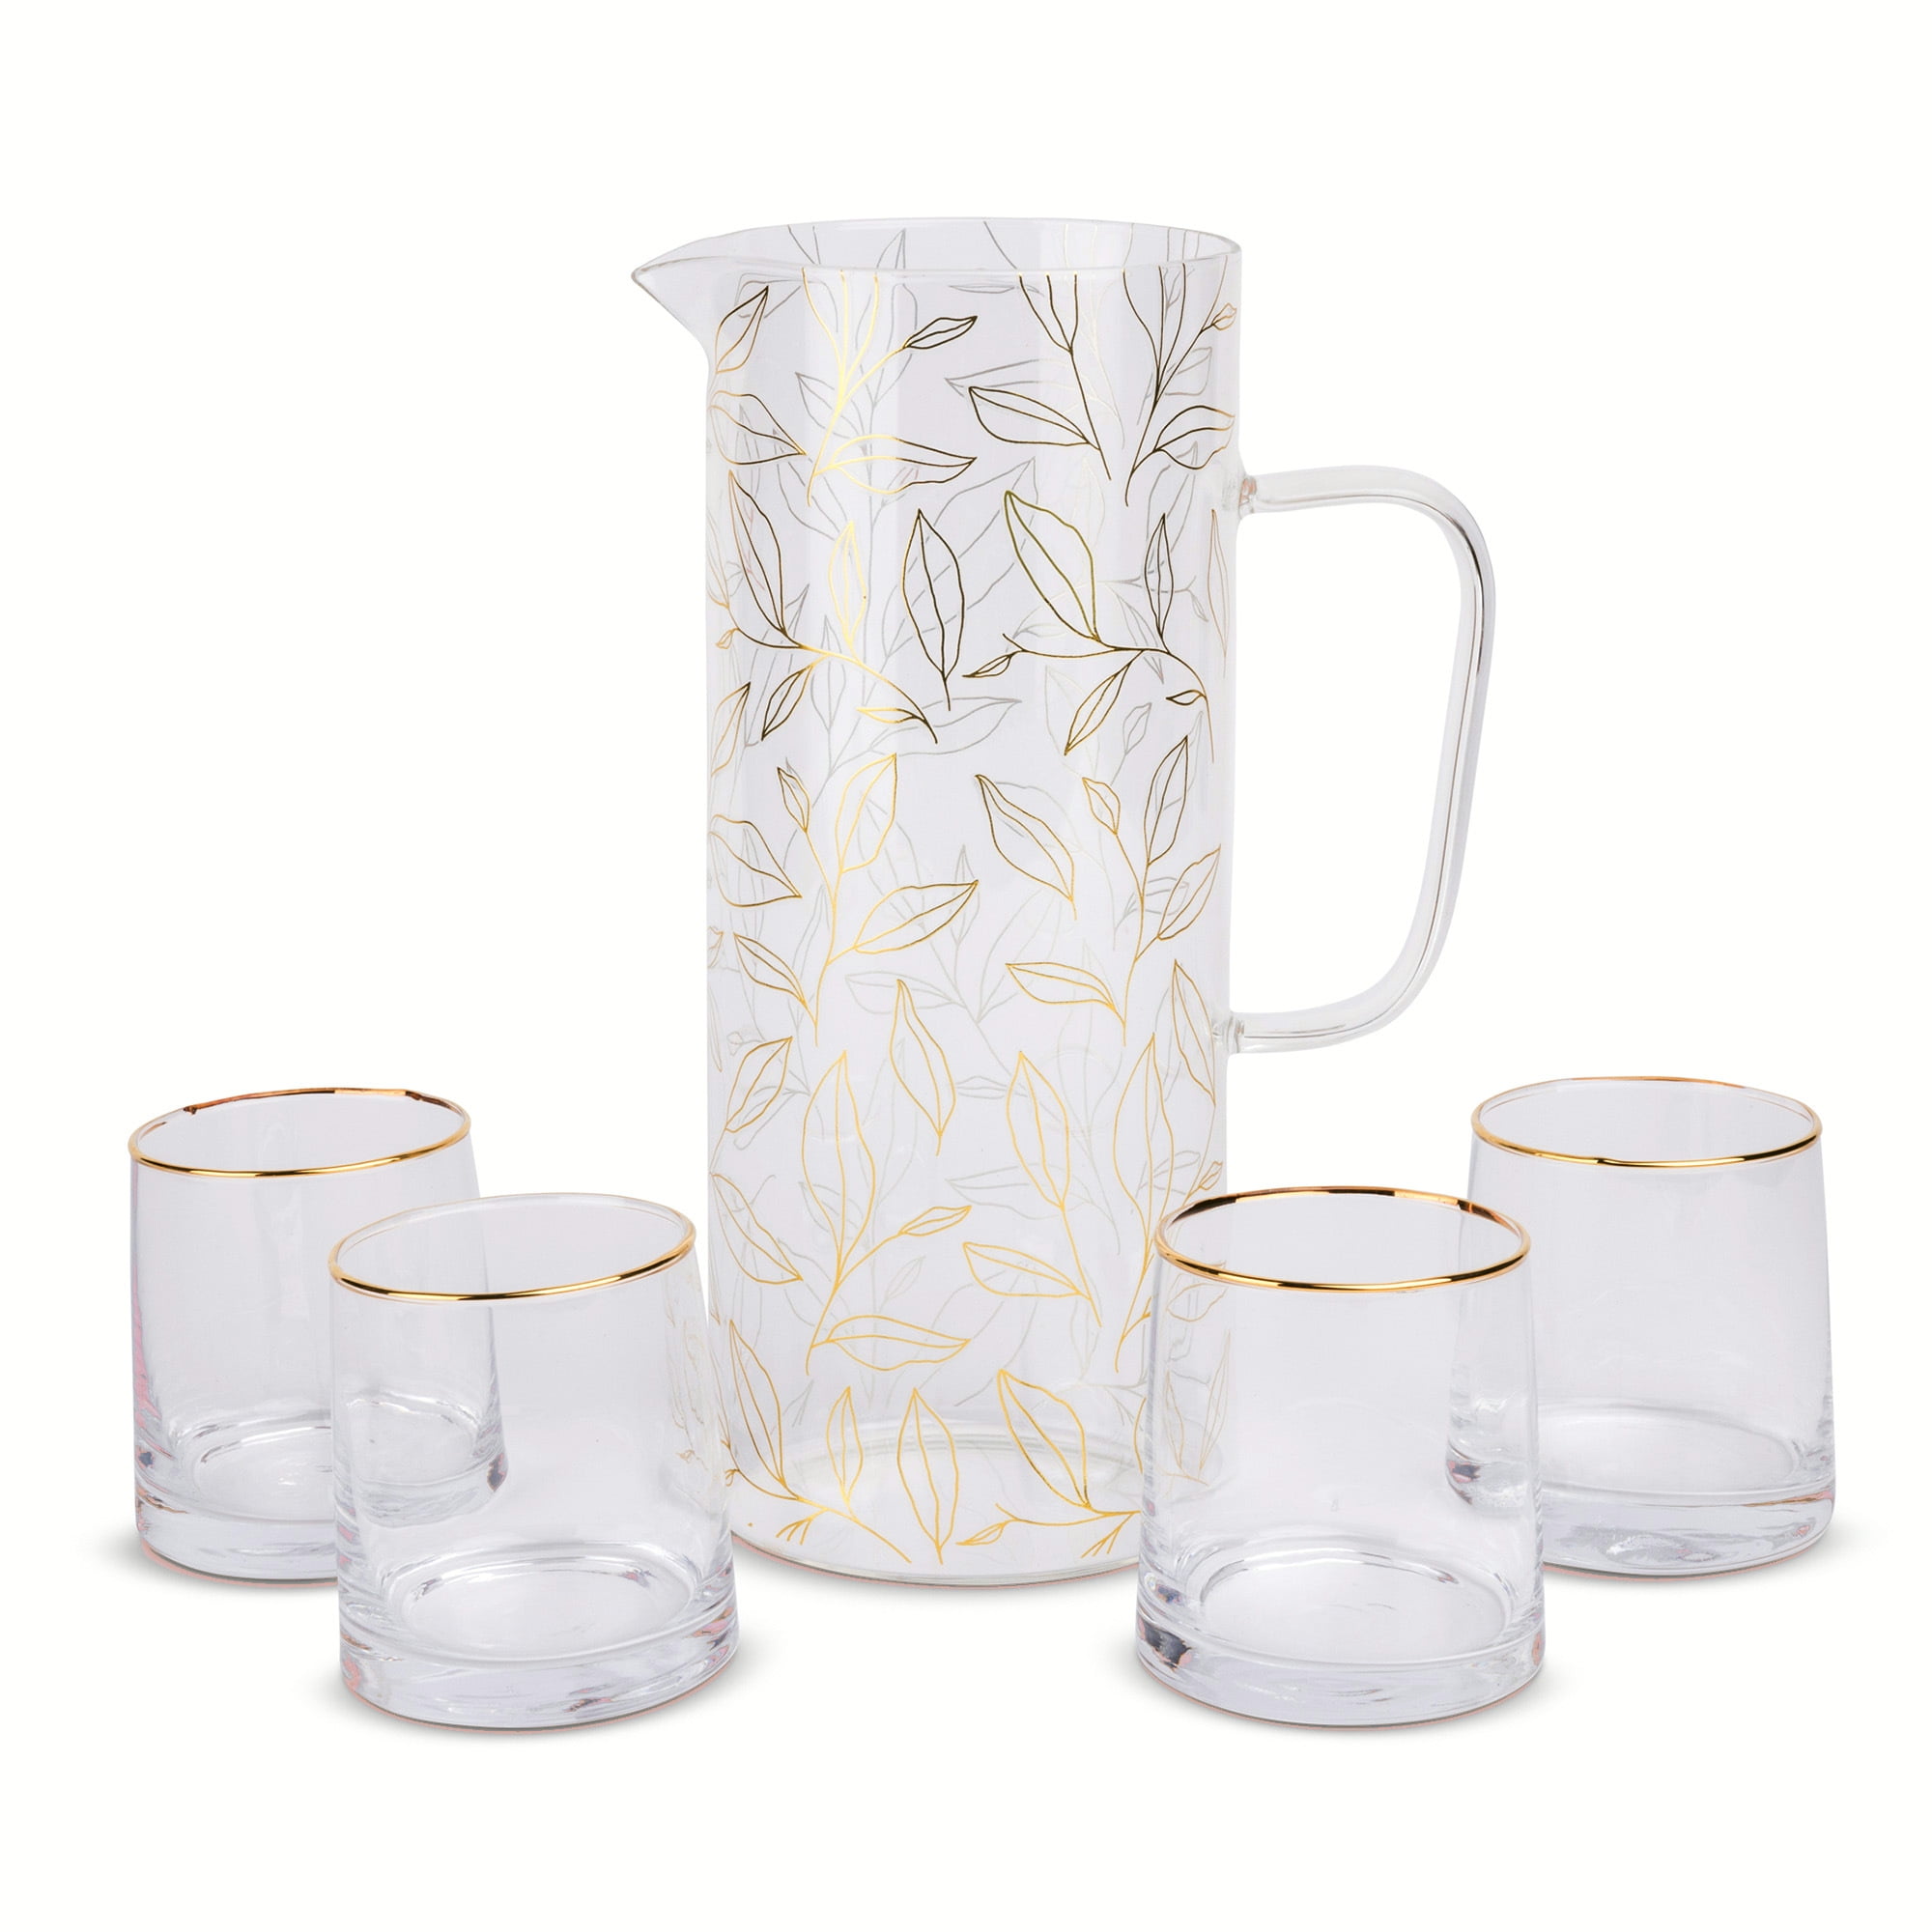 Thyme & Table 5-Piece Glass Pitcher & Cup Set, Harvest